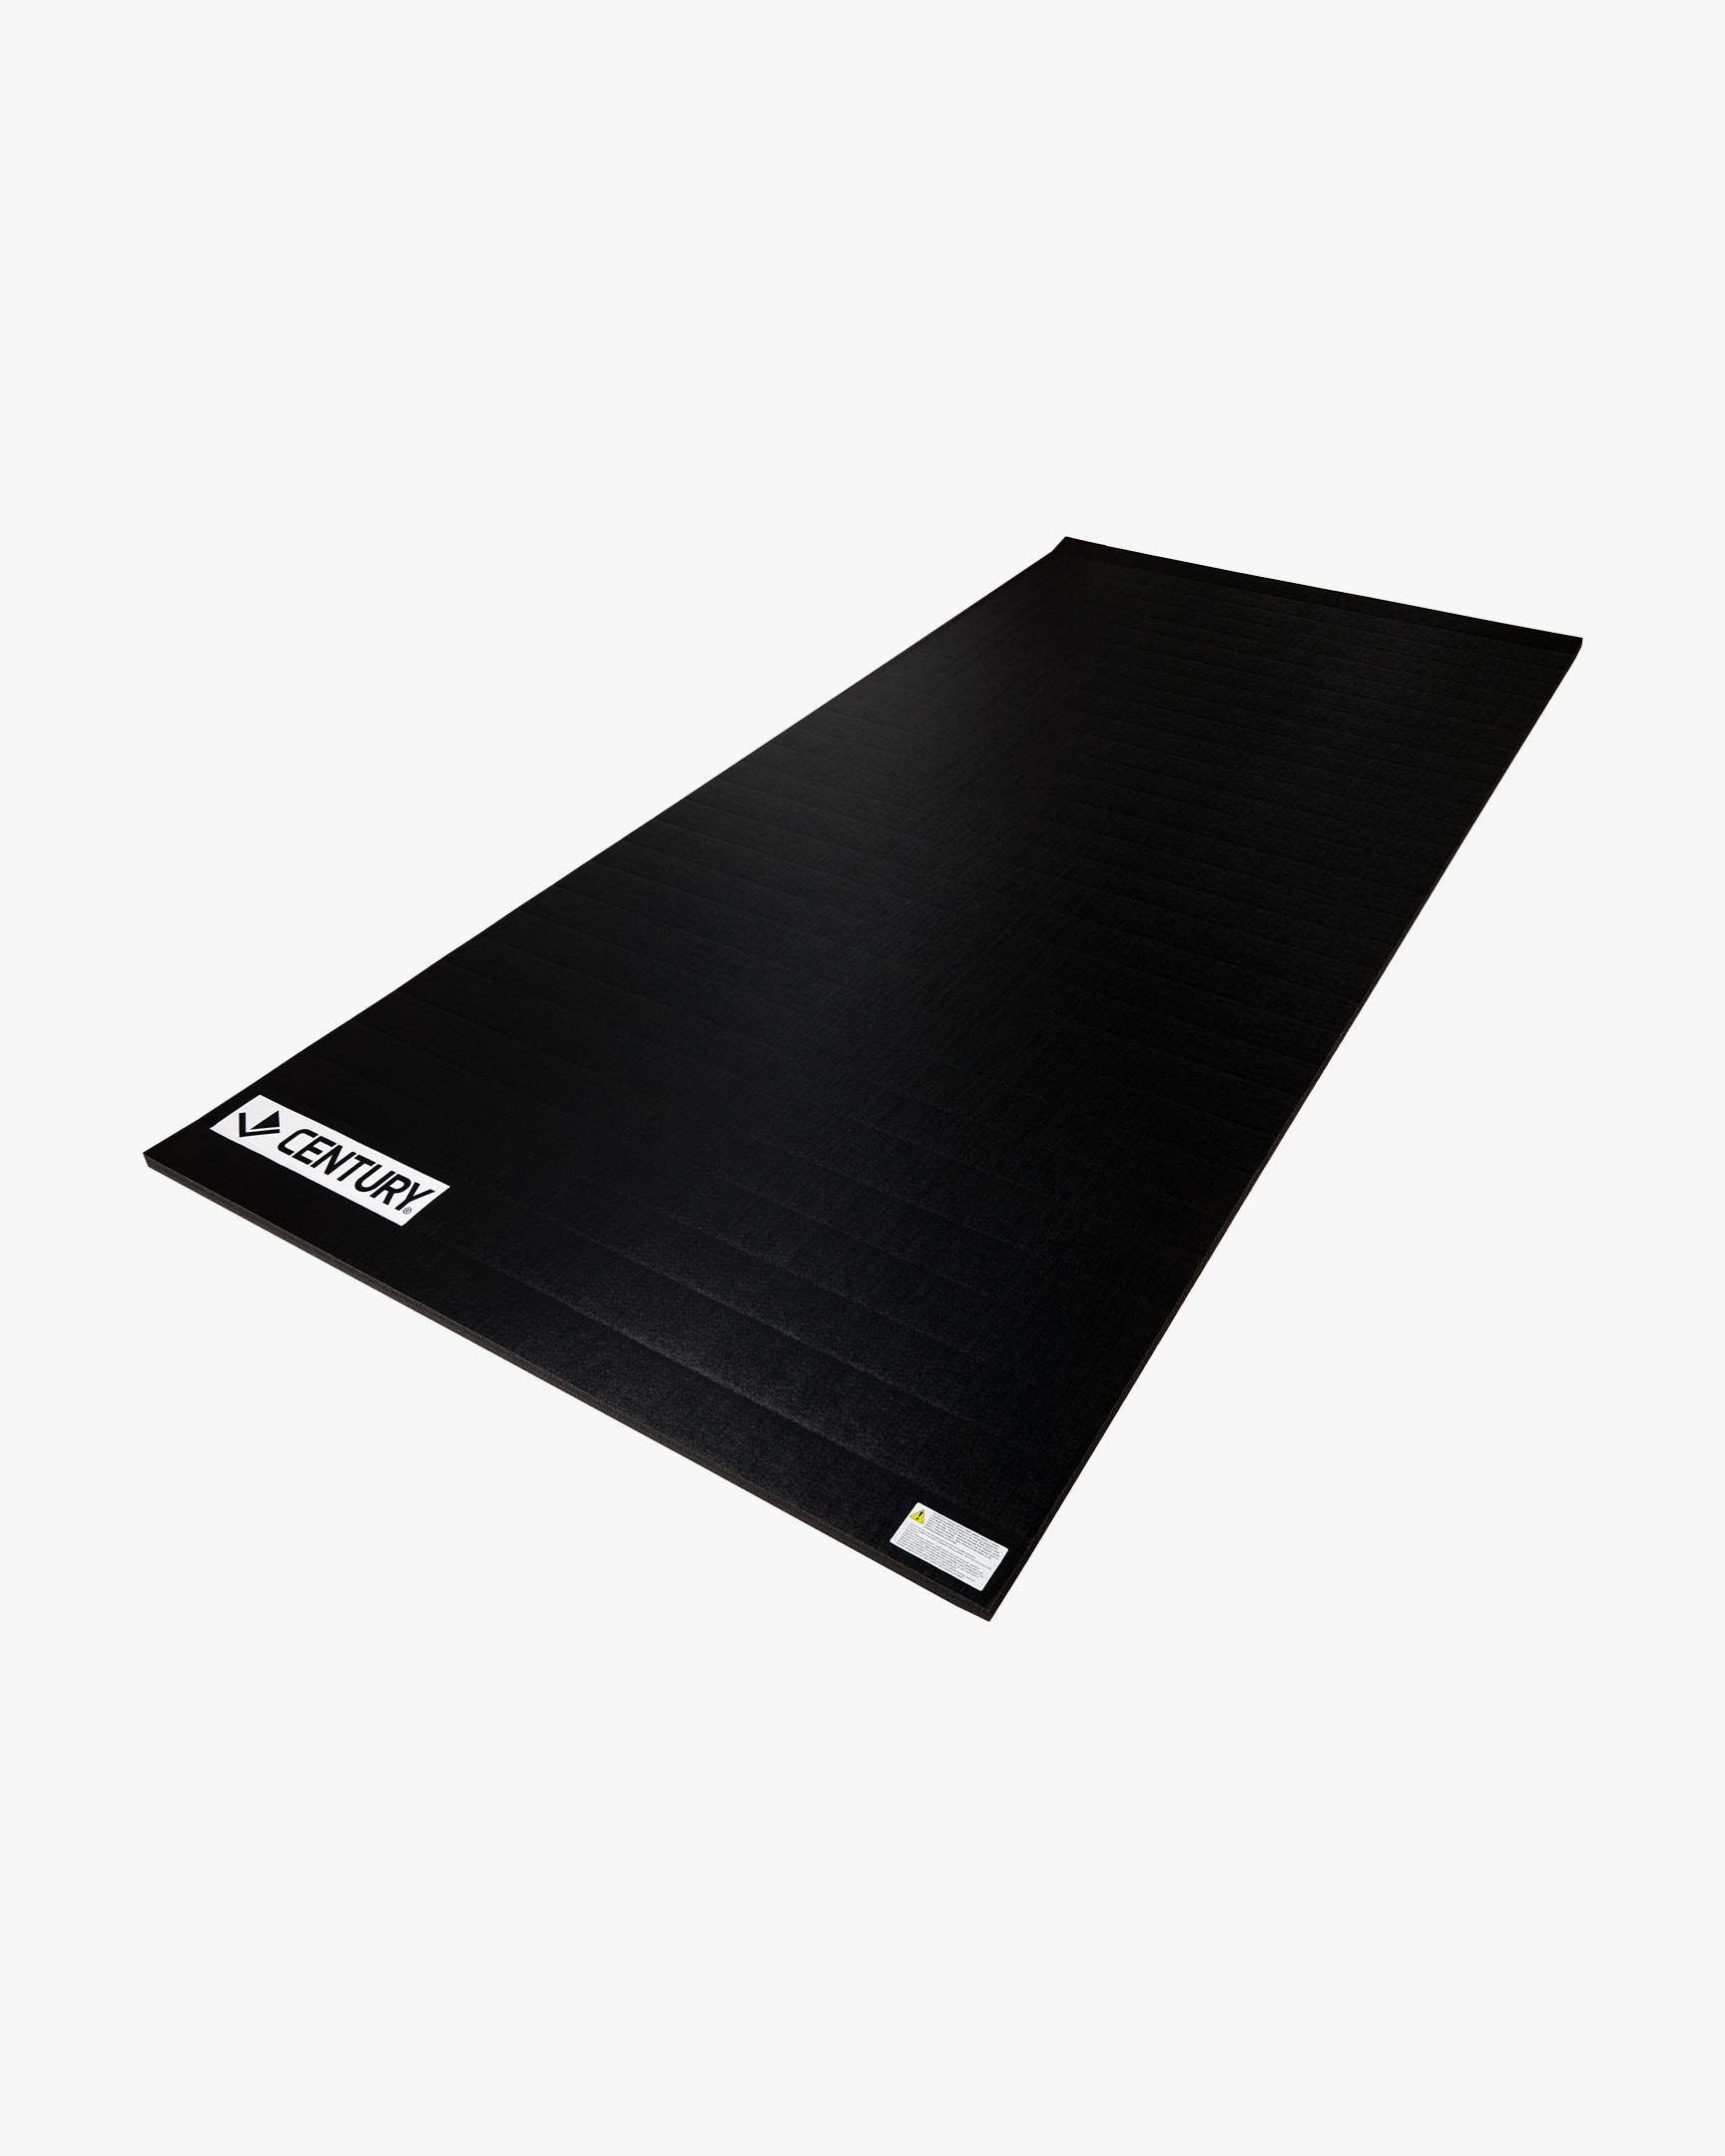 5' x 13' Century Smooth Roll Out Mat Black